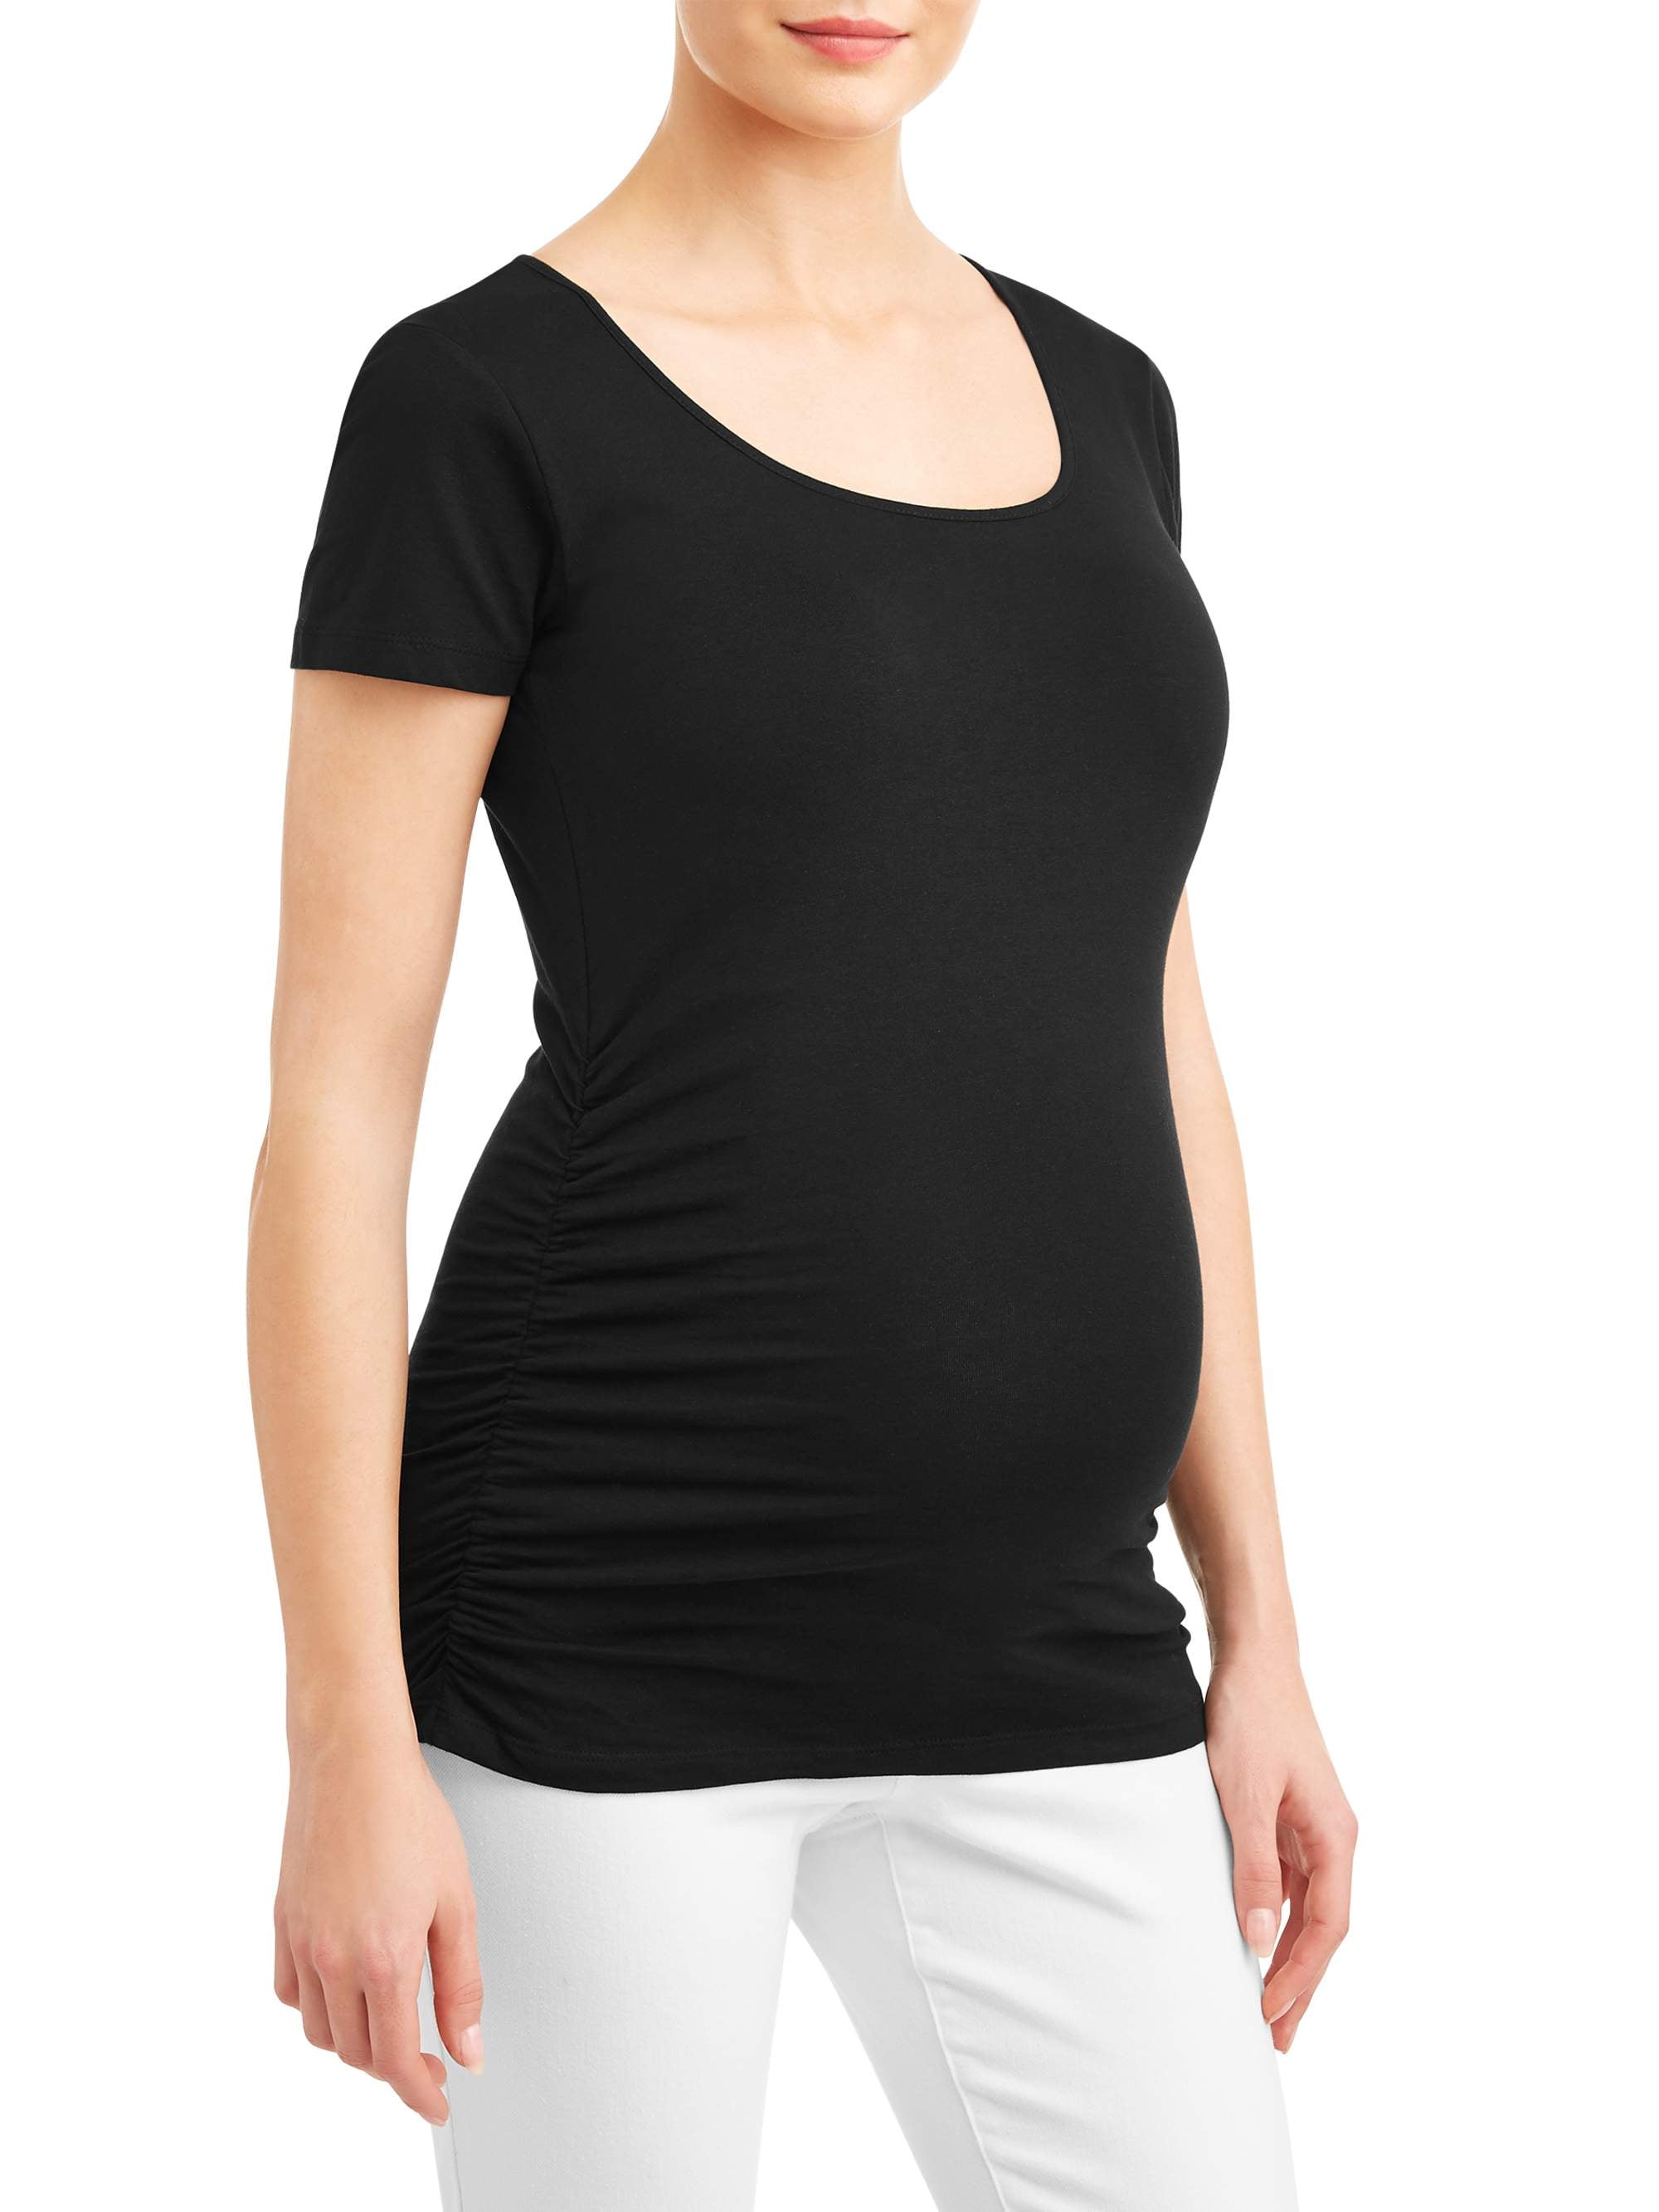 Women Lady Side Ruched Autumn Maternity Scoopneck T Shirt Top Pregnancy Clothes 